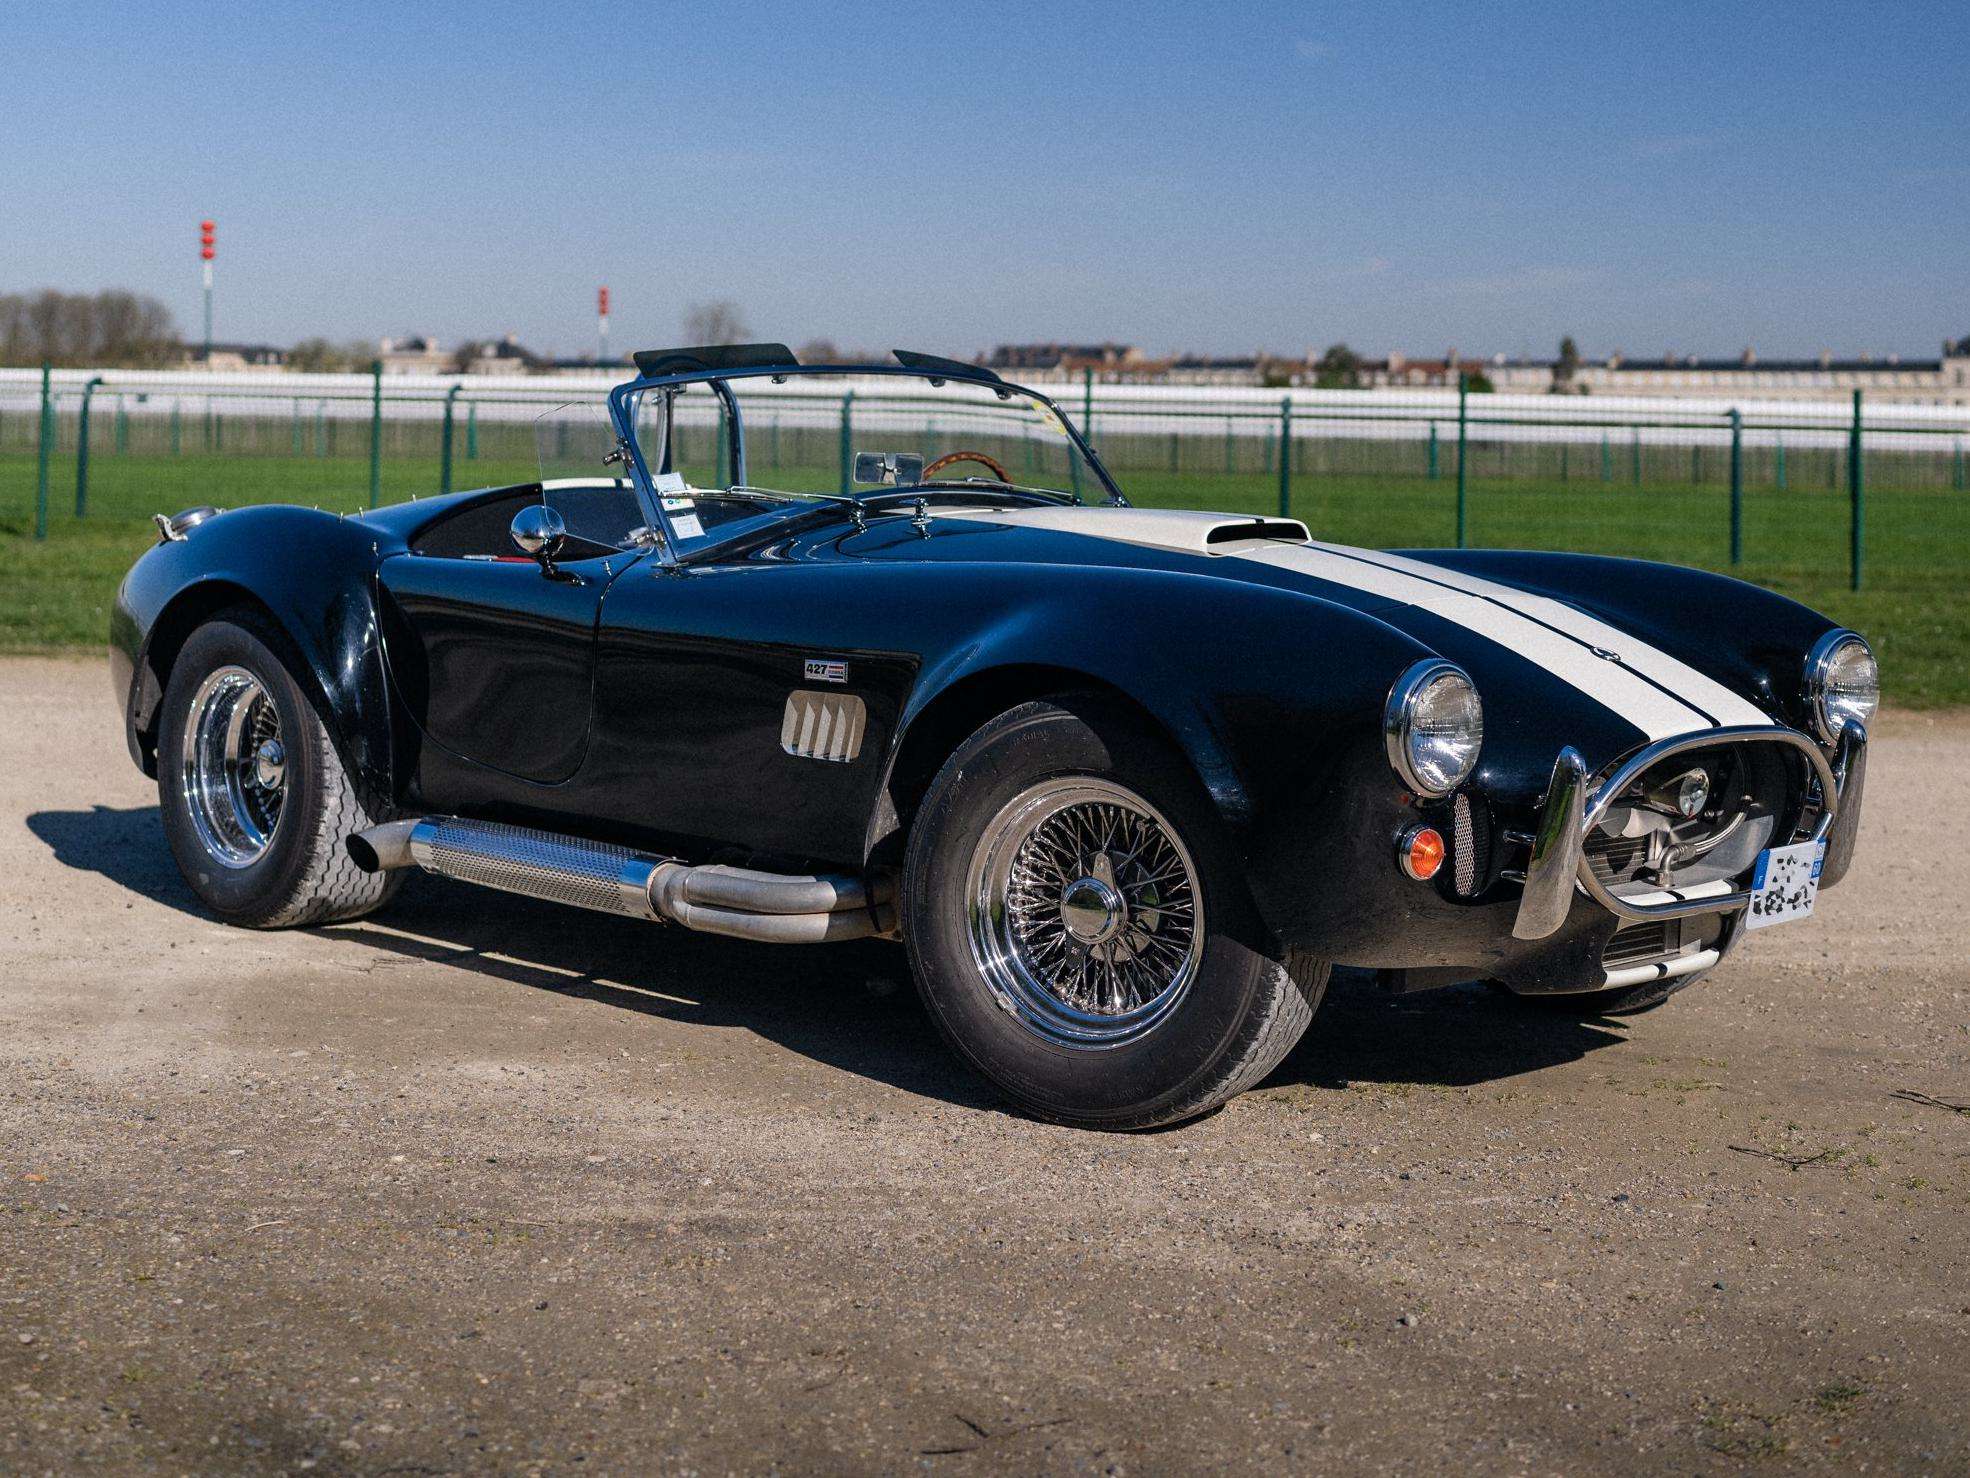 AC Cobra Convertible in Black used in Aix-en-Provence for € 79,900.-